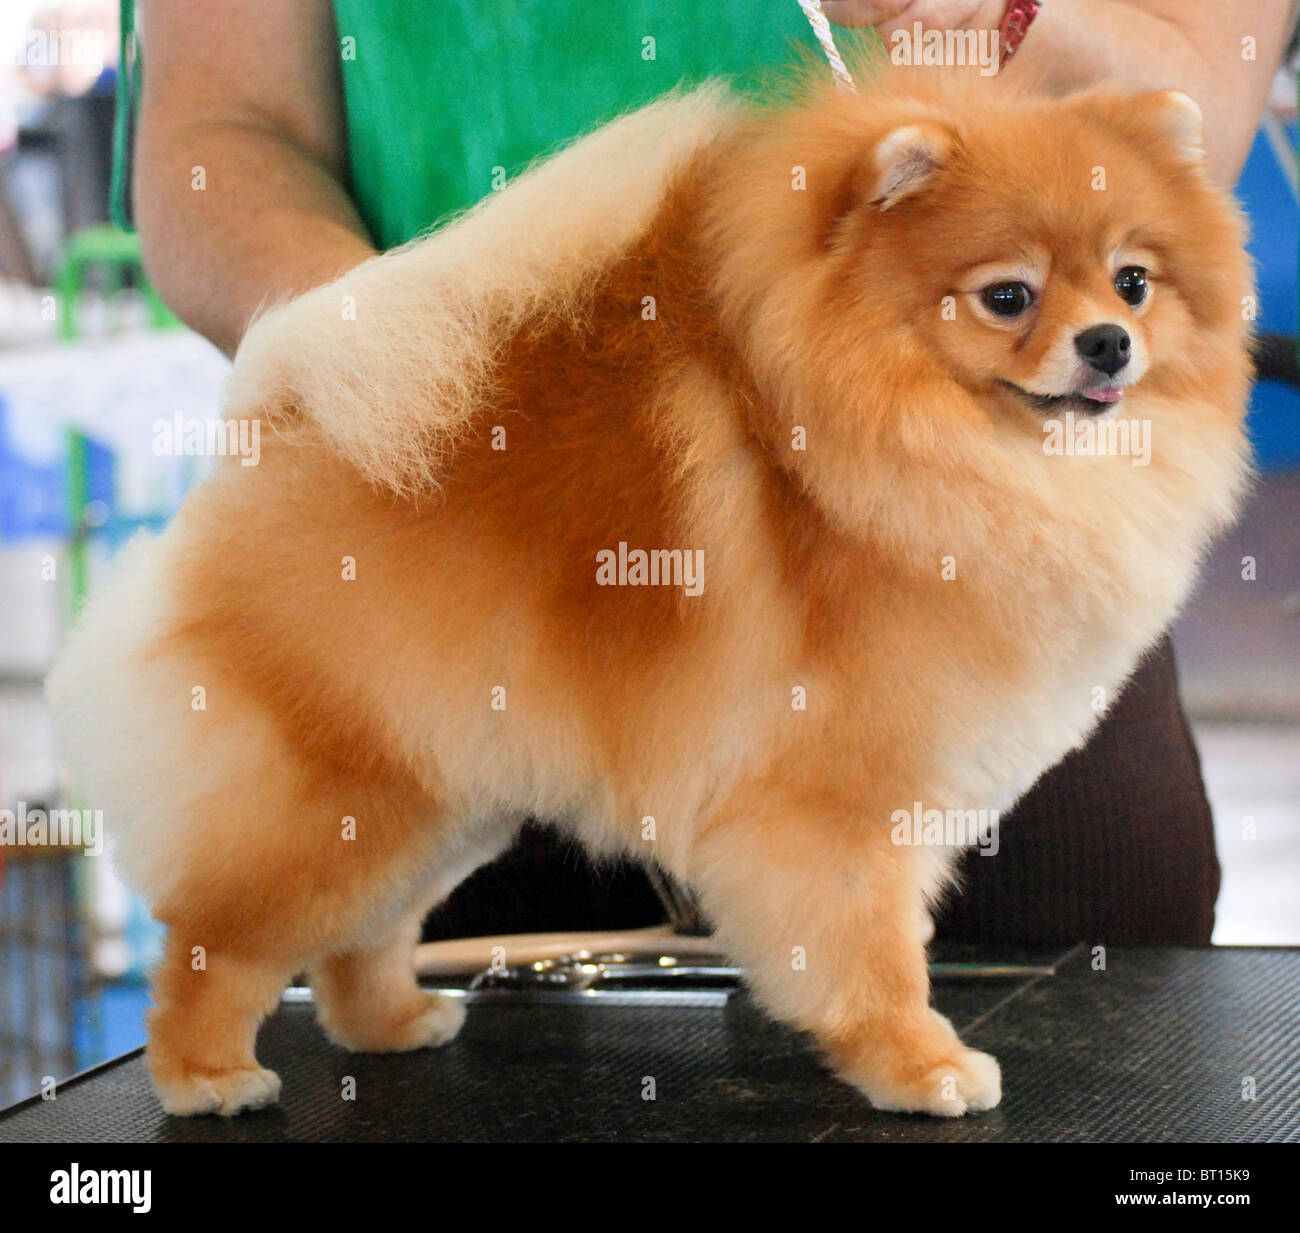 The Pomeranian (often known as a Pom) is a breed of dog of the